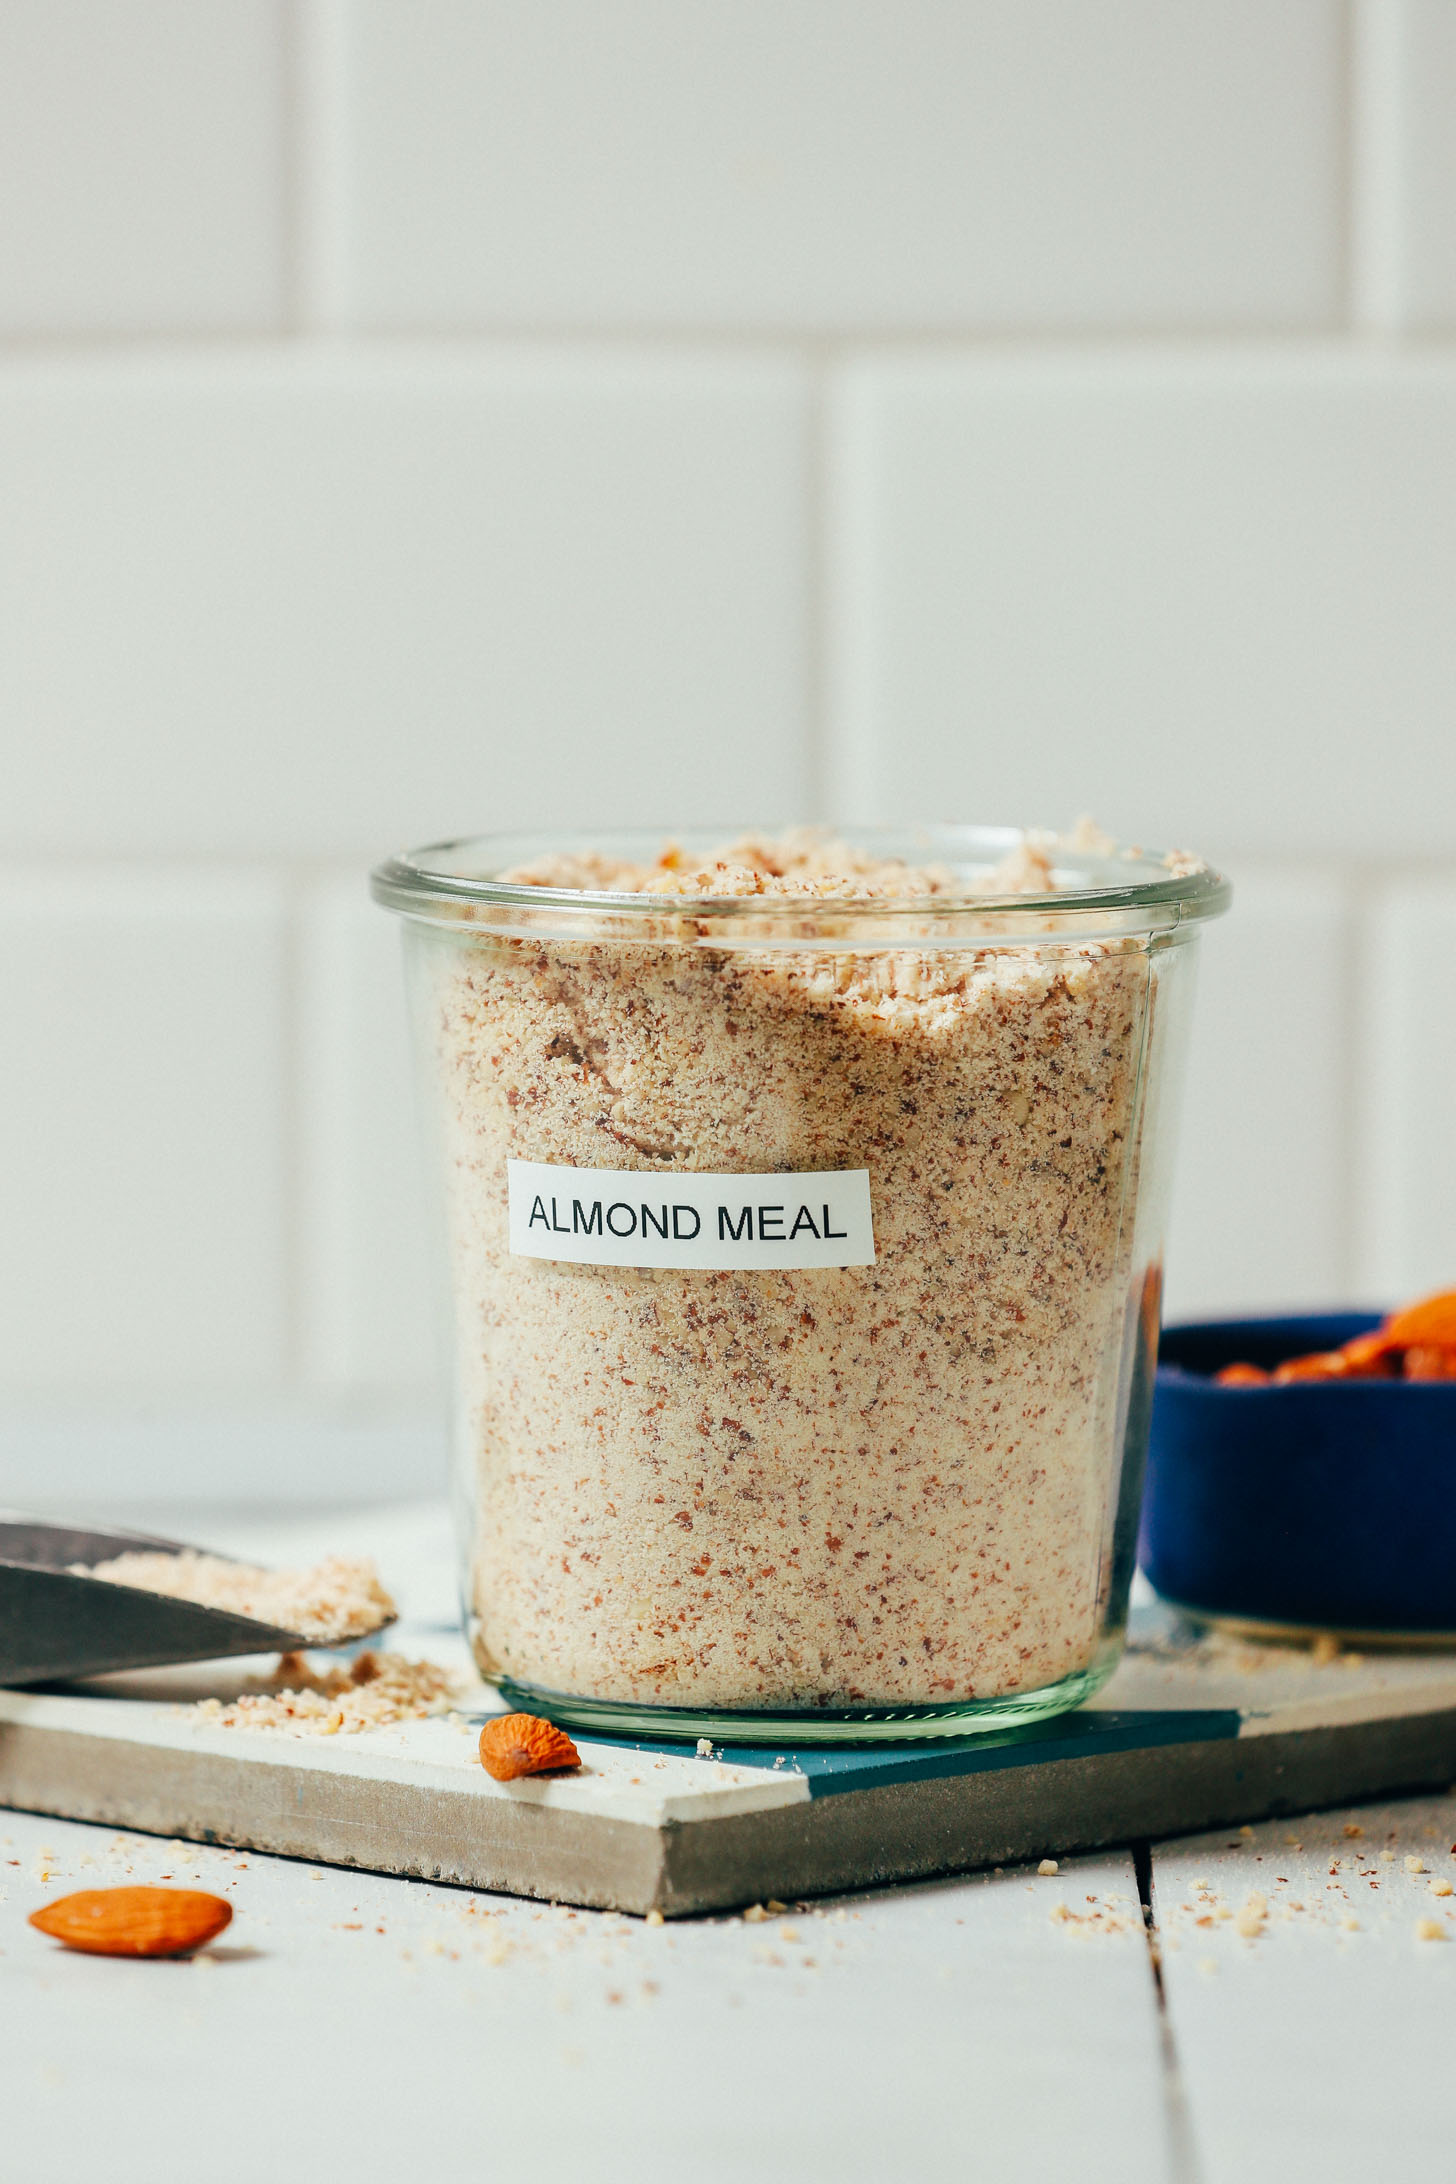 Jar of homemade almond meal on a tile